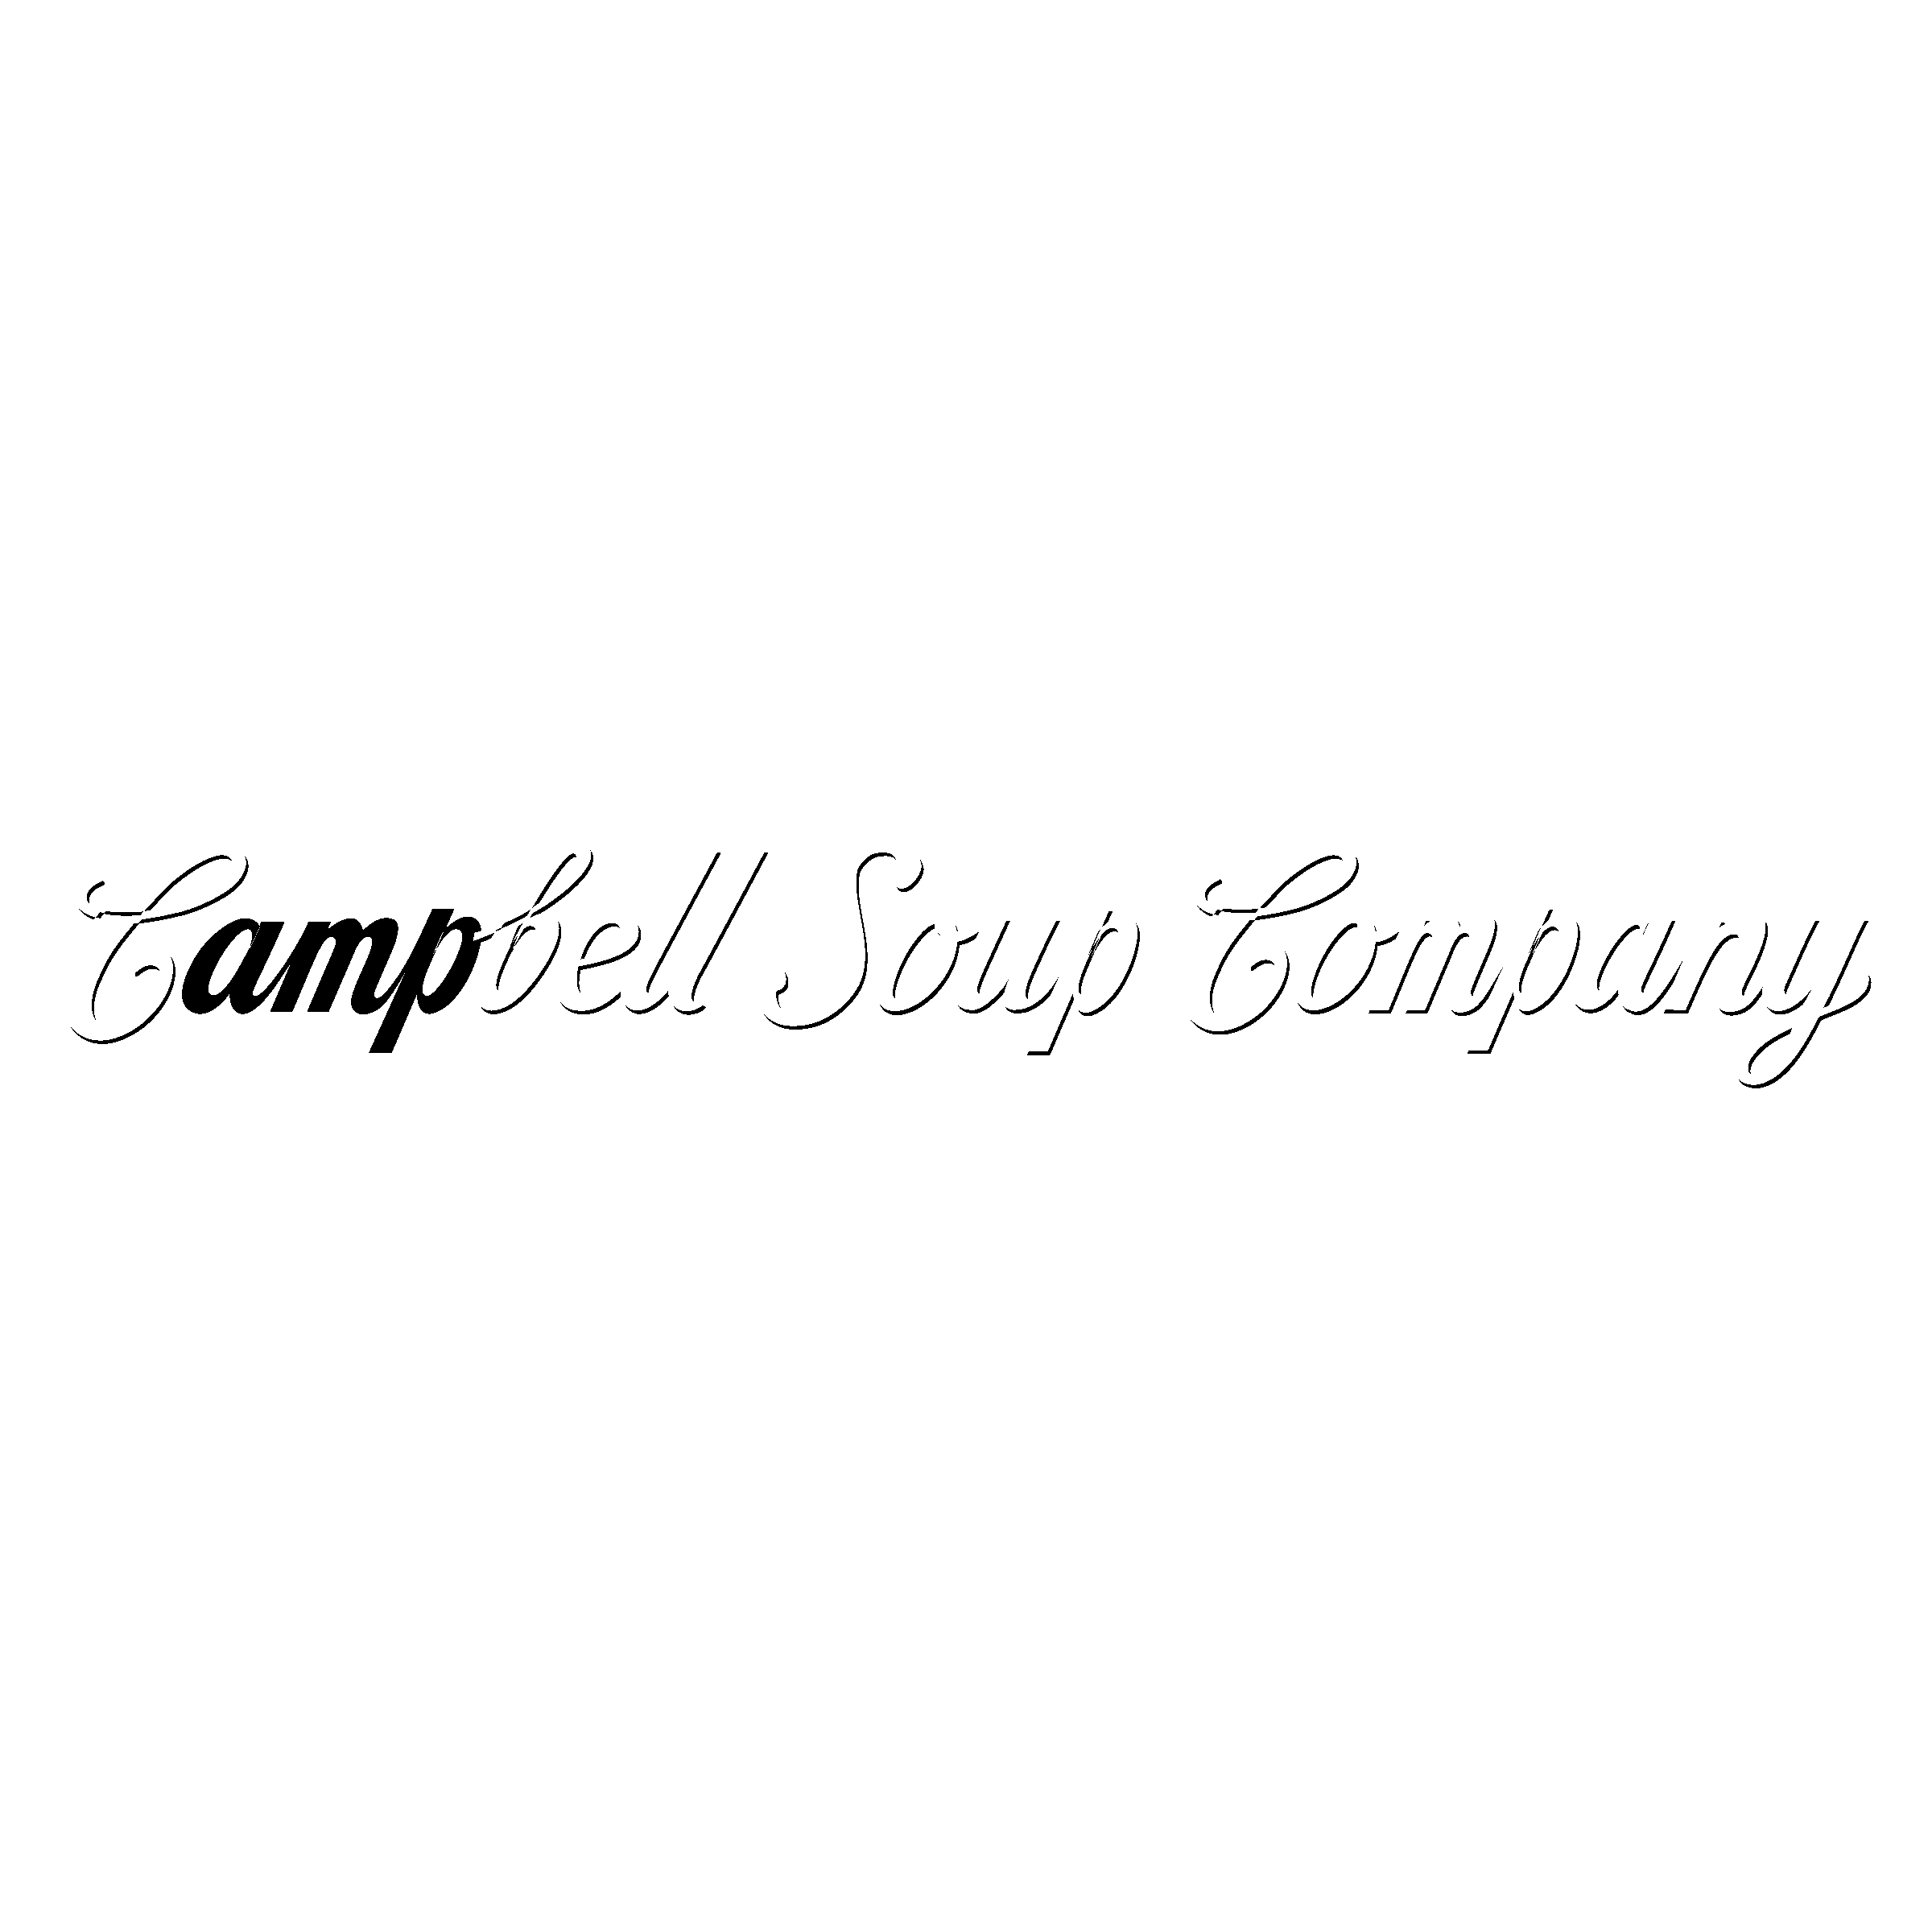 Campbell Company Logo - Campbell Soup Company Logo PNG Transparent & SVG Vector - Freebie Supply